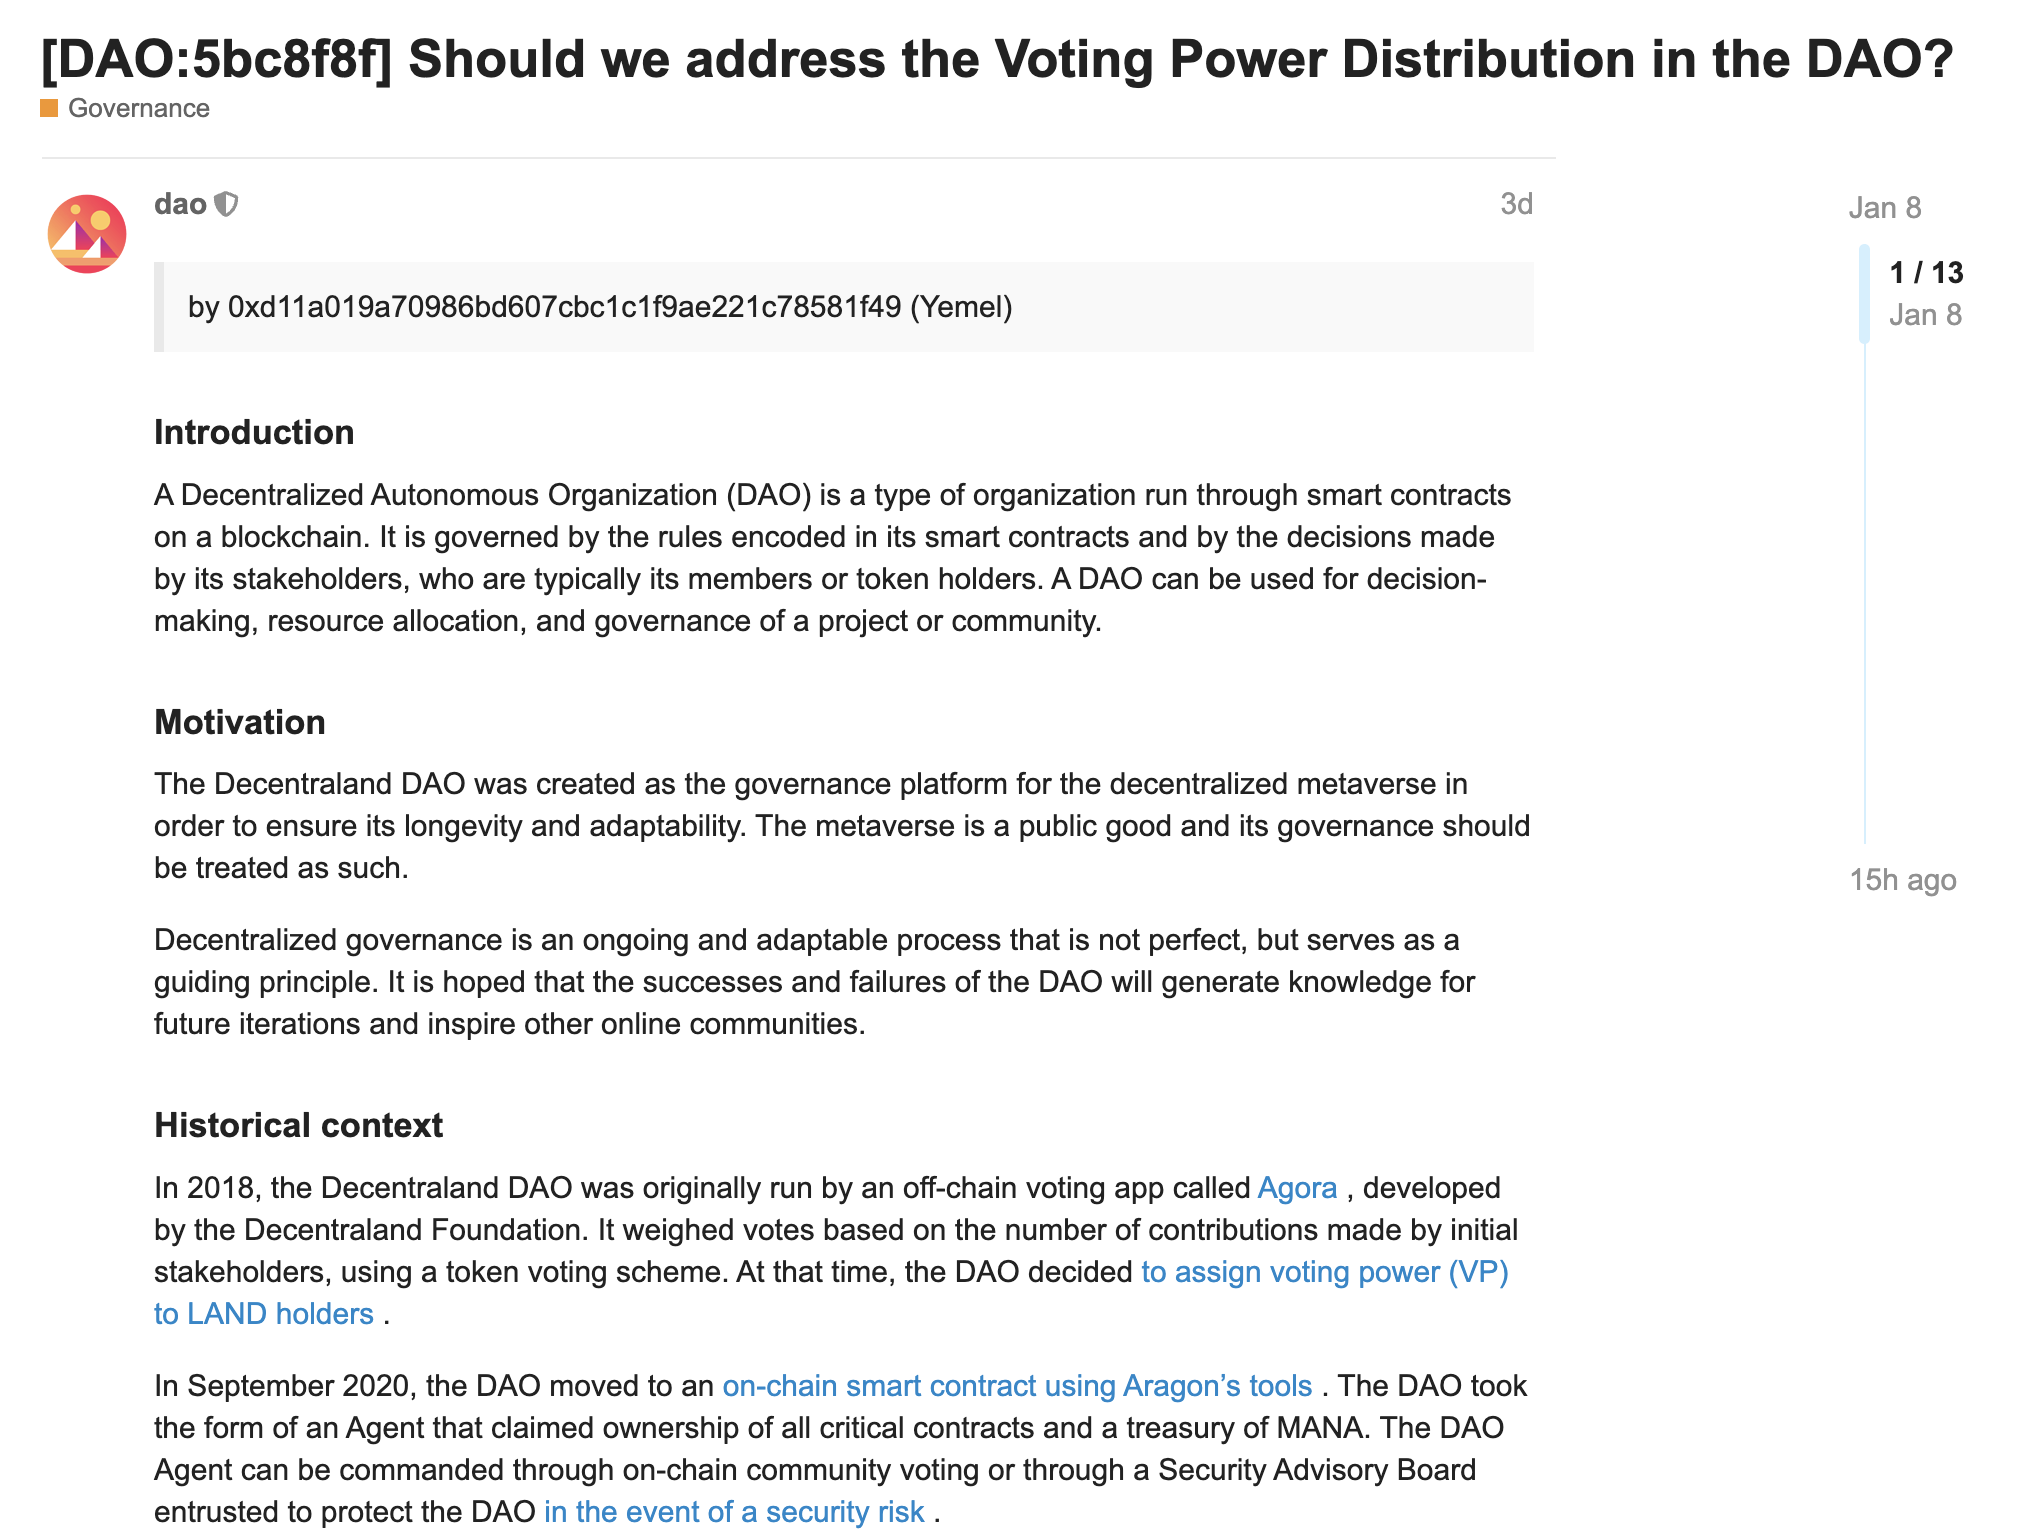 Should we address the voting power distribution in the DAO?